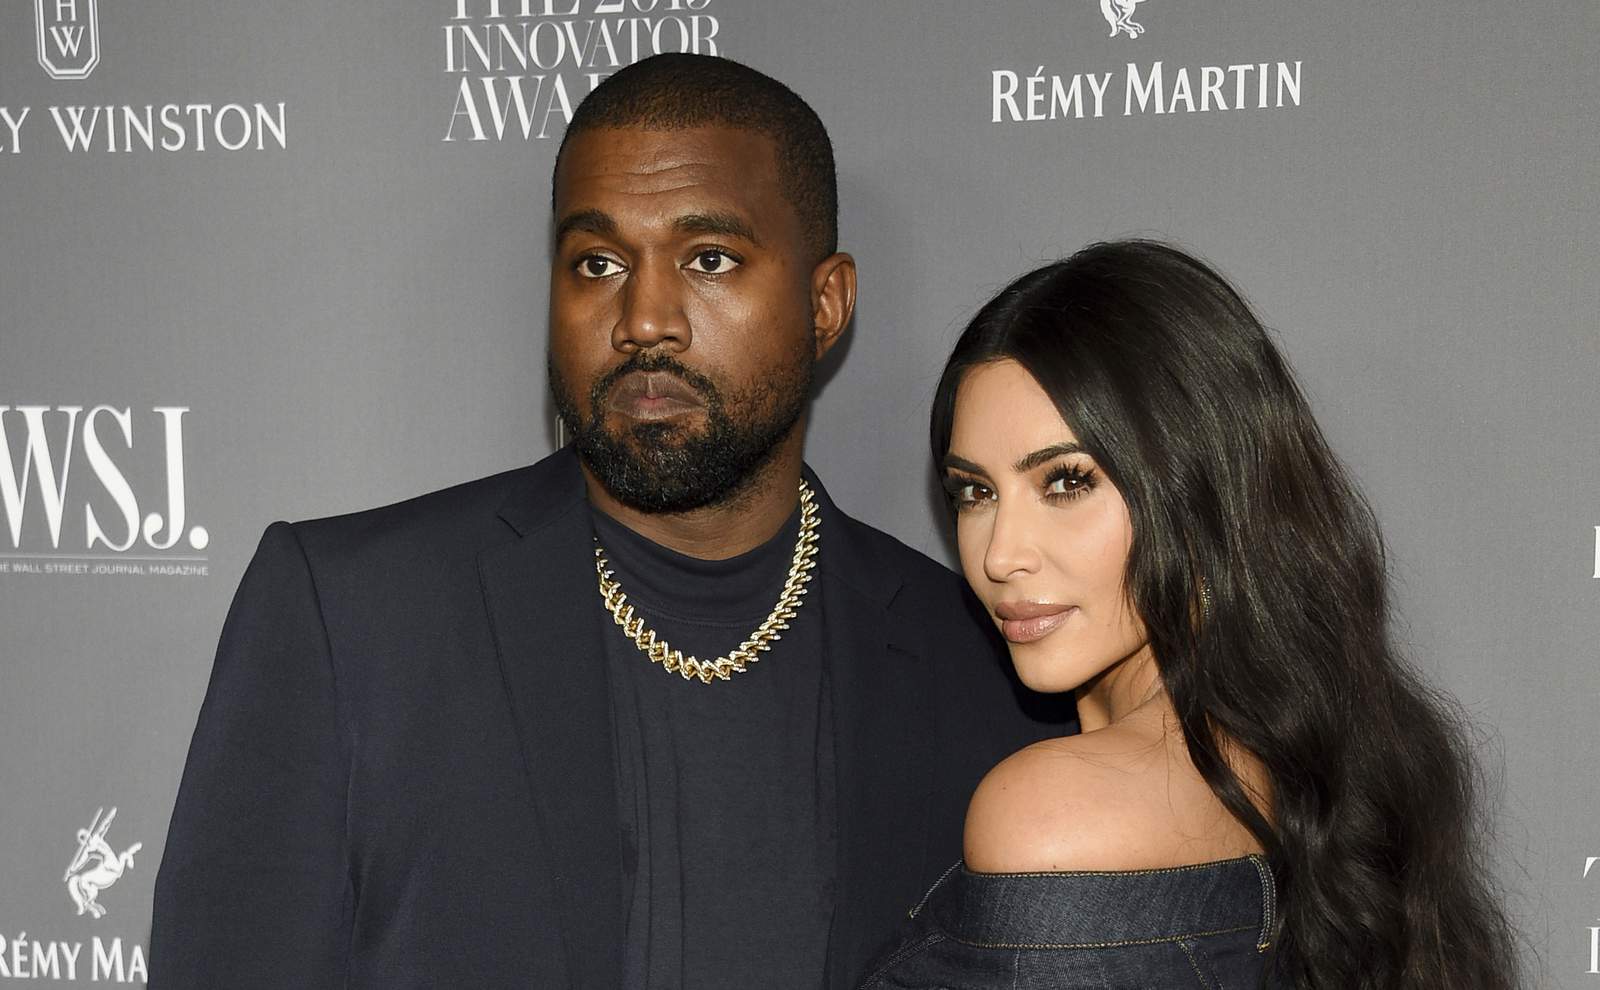 Kim and Kanye: Tales of an uber celeb marriage gone wrong